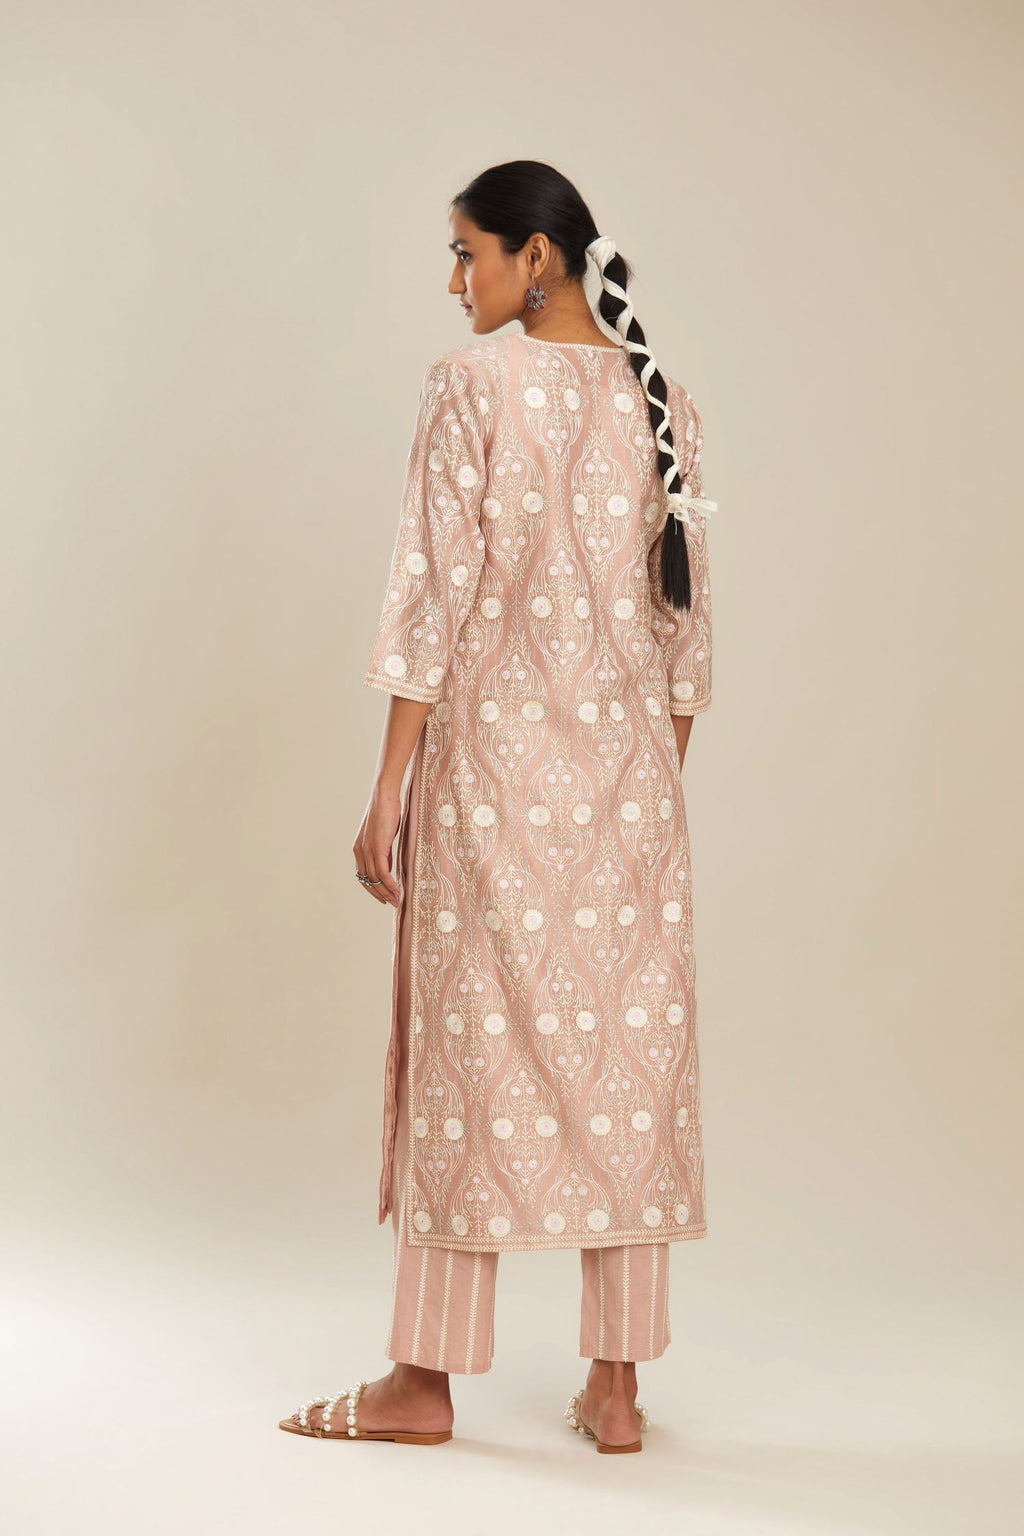 Old rose silk chanderi straight kurta set with full jaal embroidery at front and back.